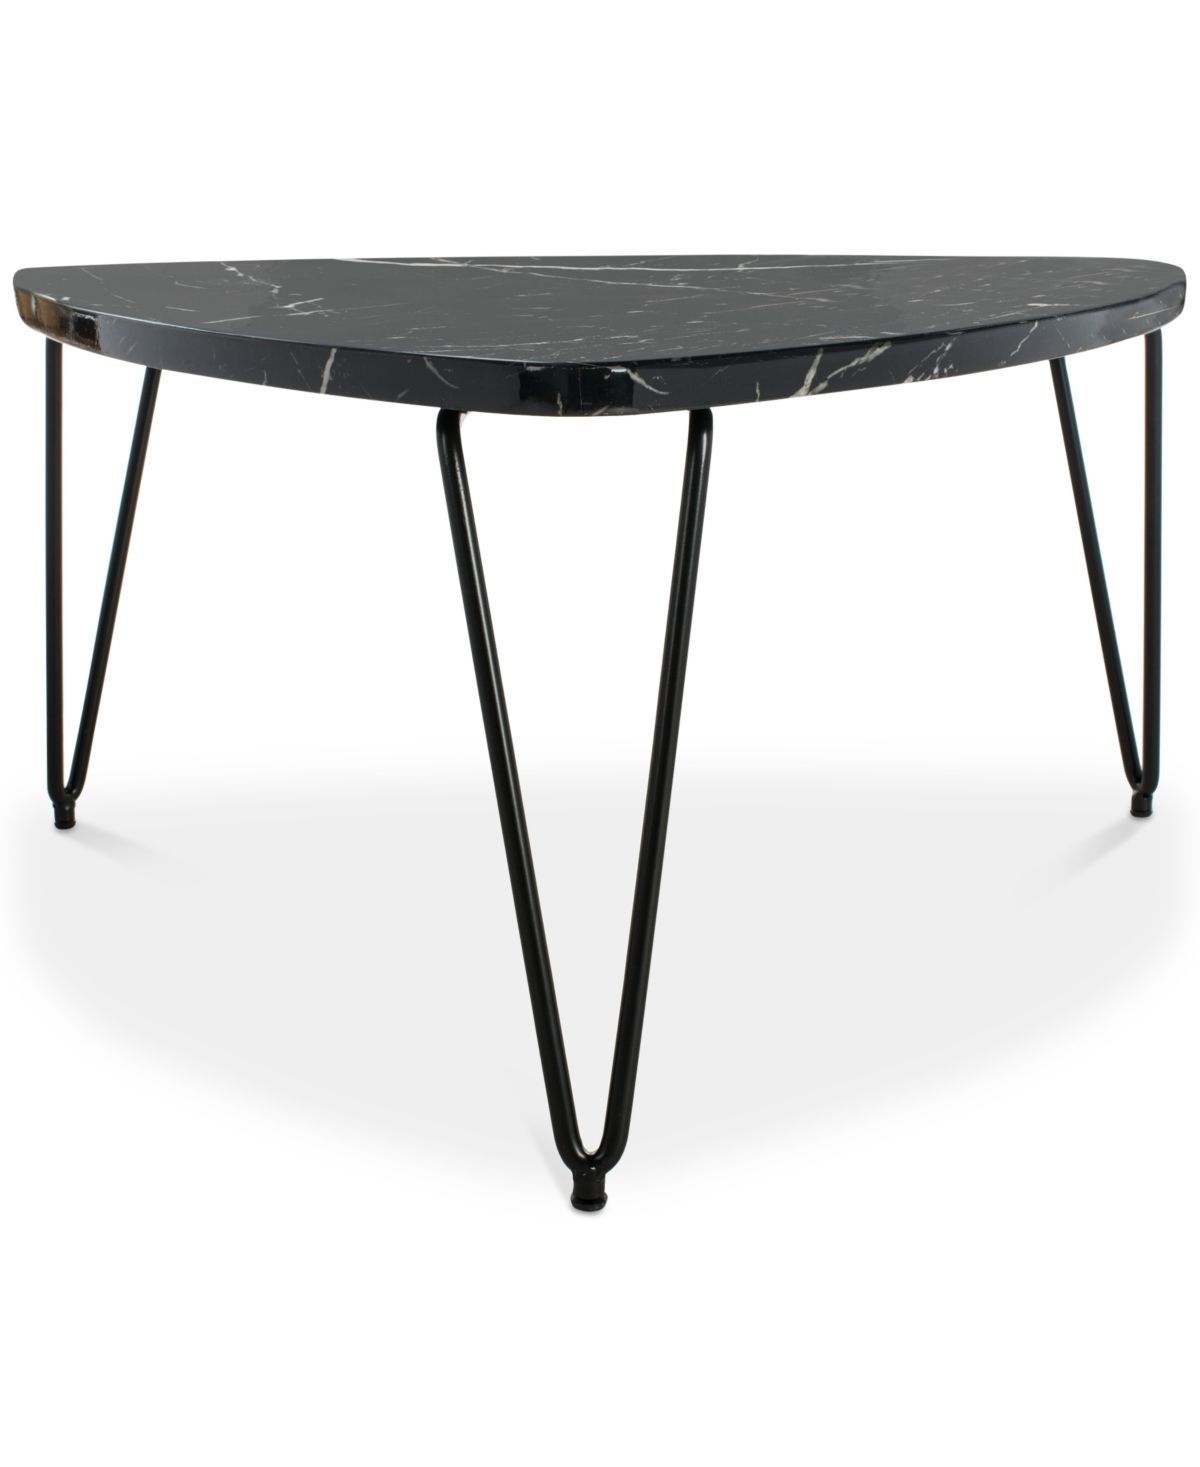 Jacky Triangle Coffee Table, Quick Ship – Black Marble In 2020 Throughout Newest Black Metal And Marble Coffee Tables (View 1 of 10)